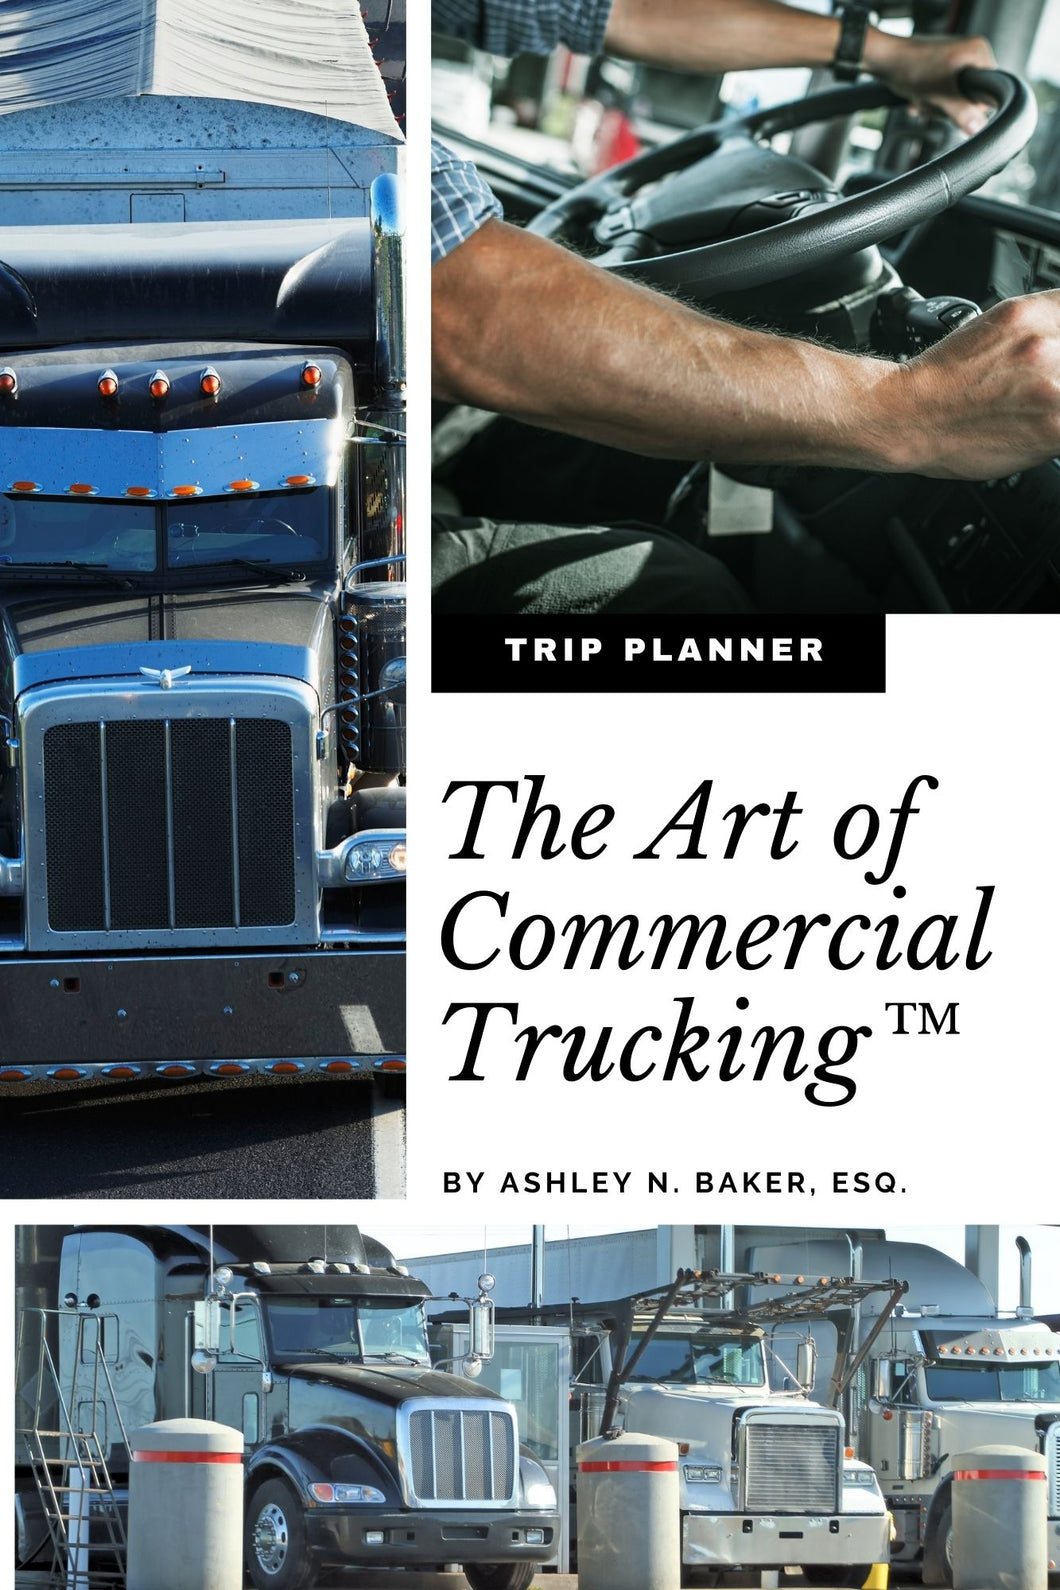 The Art of Commercial Trucking: Trip Planner